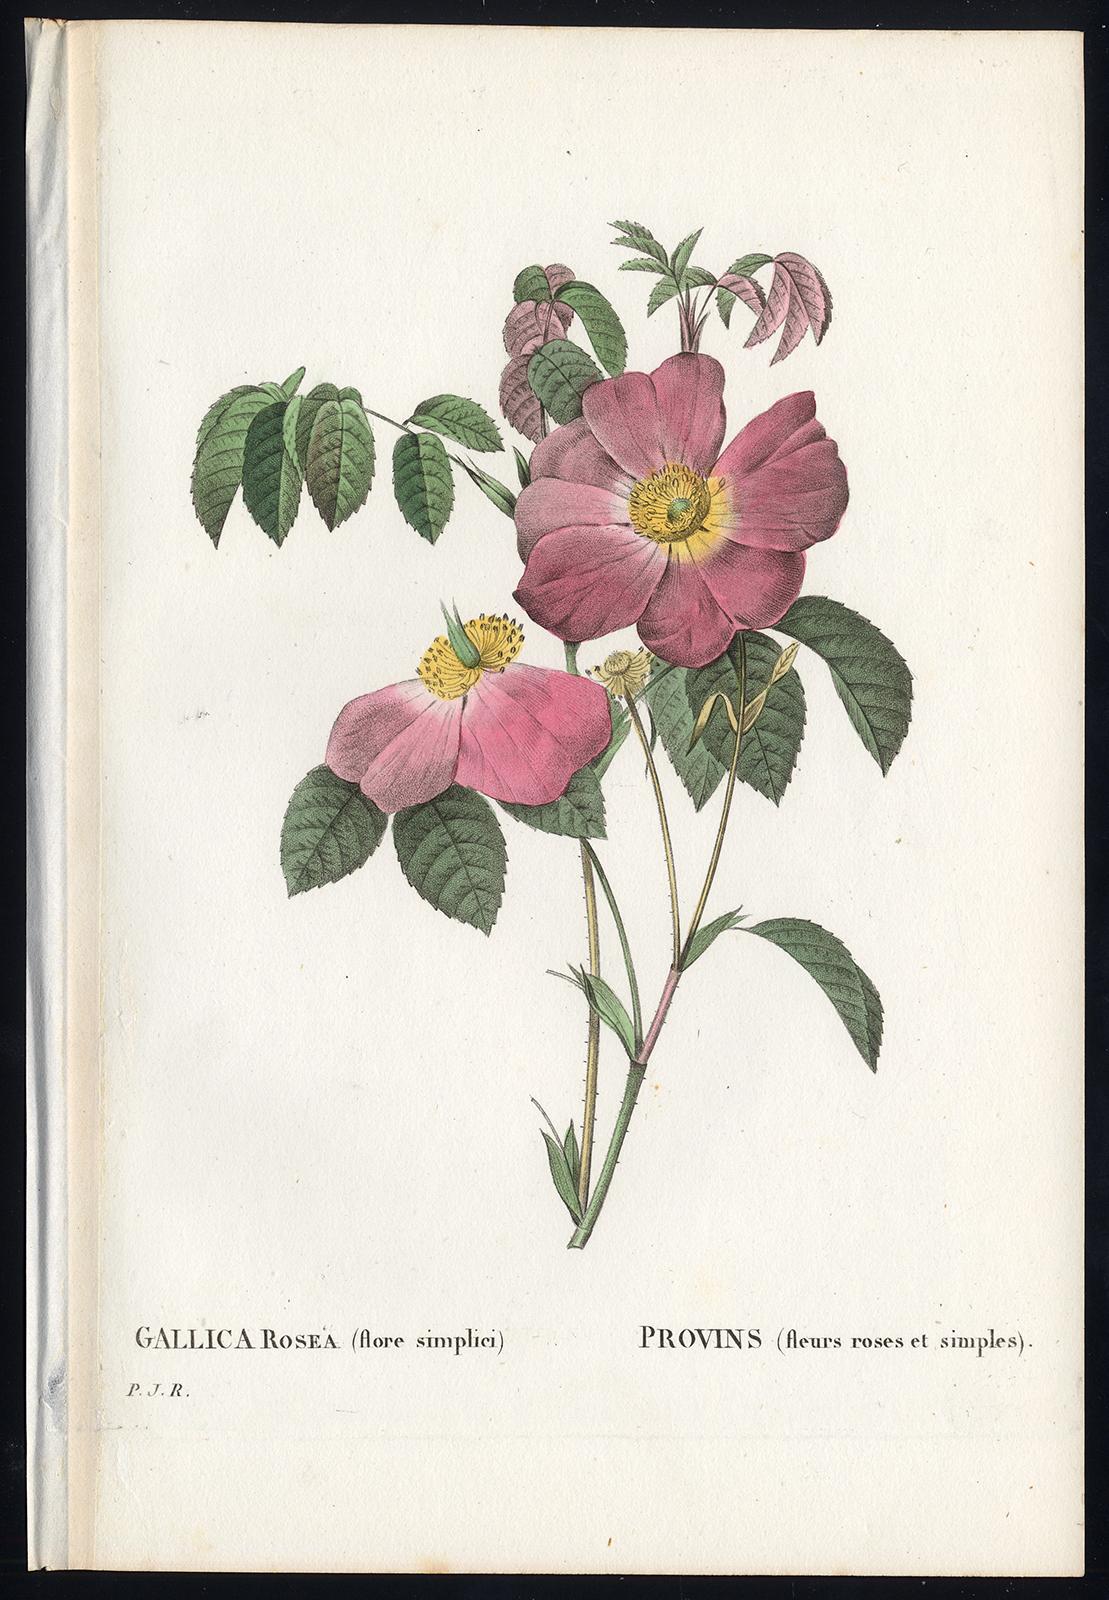 Pierre-Joseph Redouté Print - French Rose by Redoute - Les Roses - Handcoloured engraving - 19th century